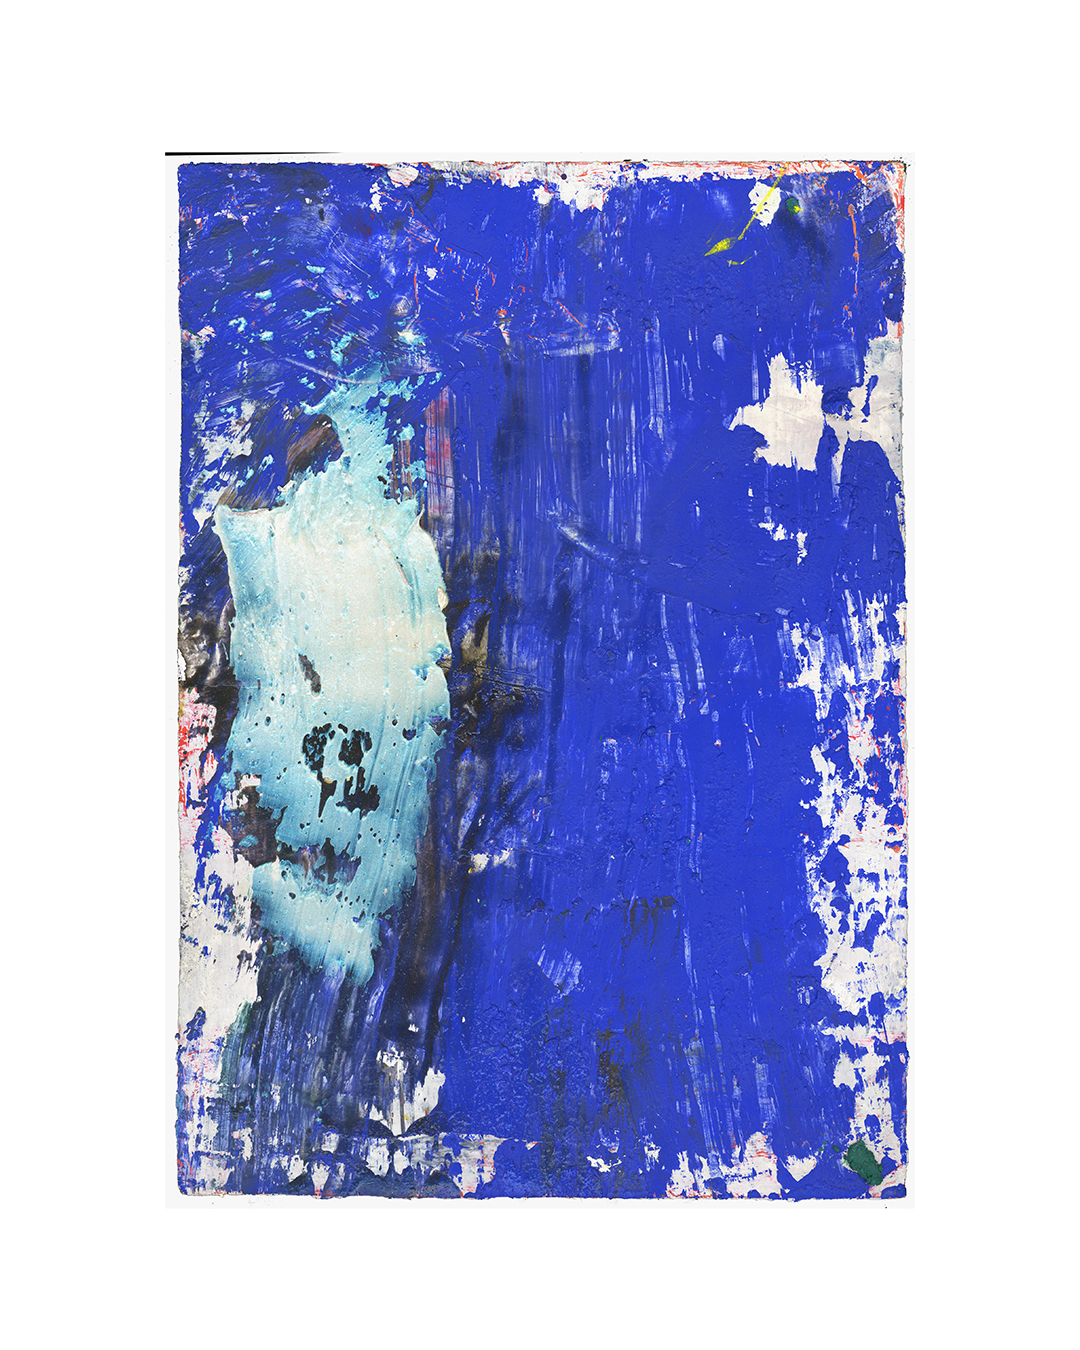 Piet Dieleman, untitled, 2020, painting, tempera, acrylic paint, laser wood print on paper, 385 x 275 mm, €930